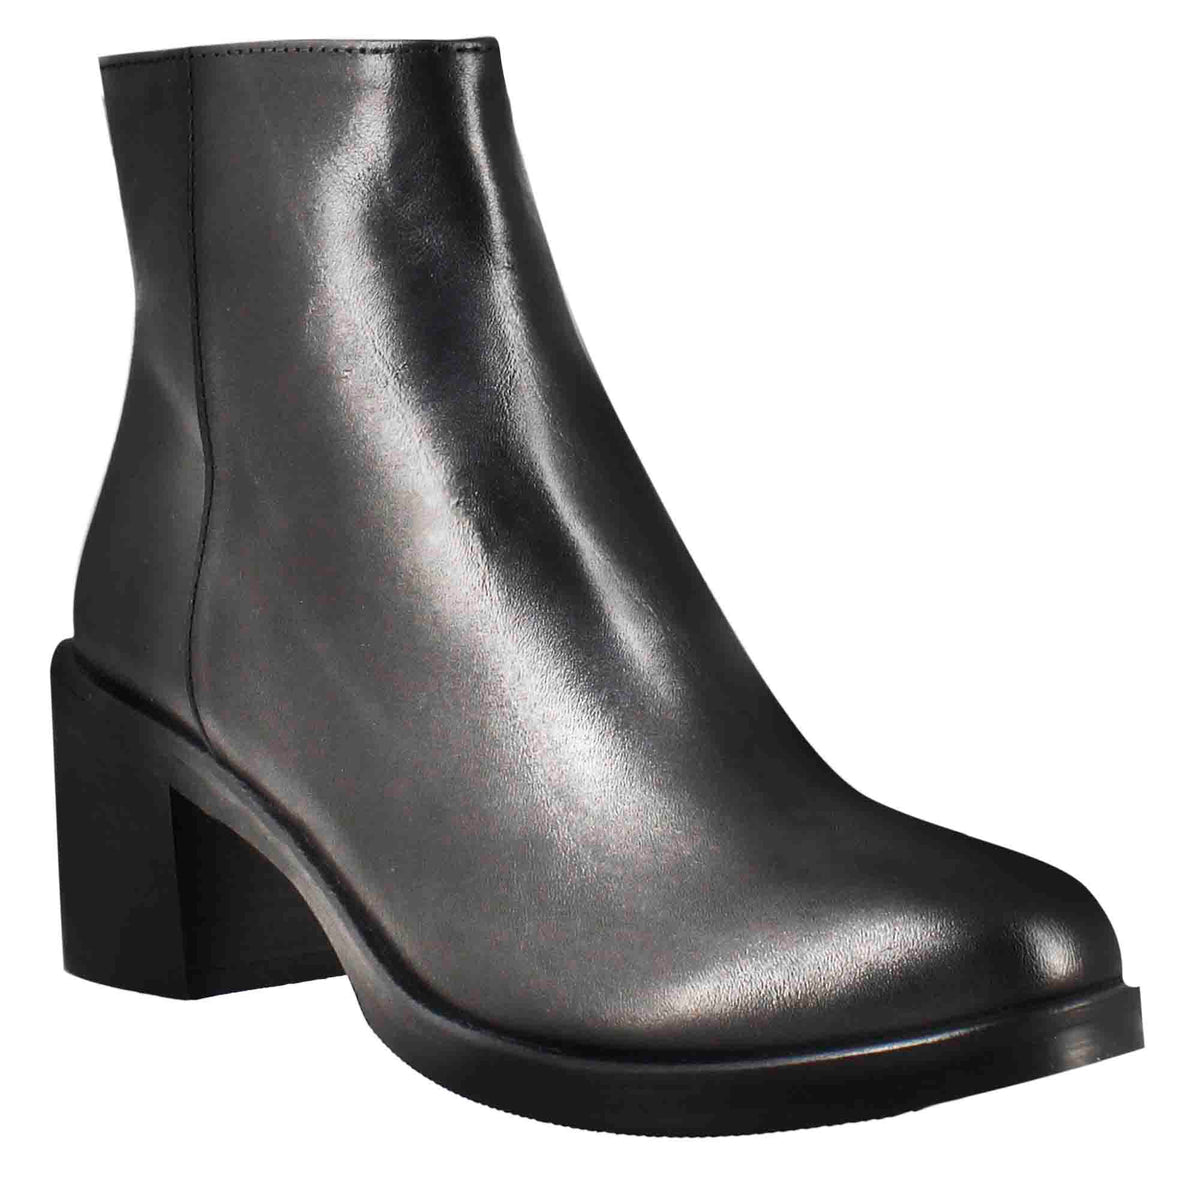 Women's smooth ankle boot with medium heel in black color leather